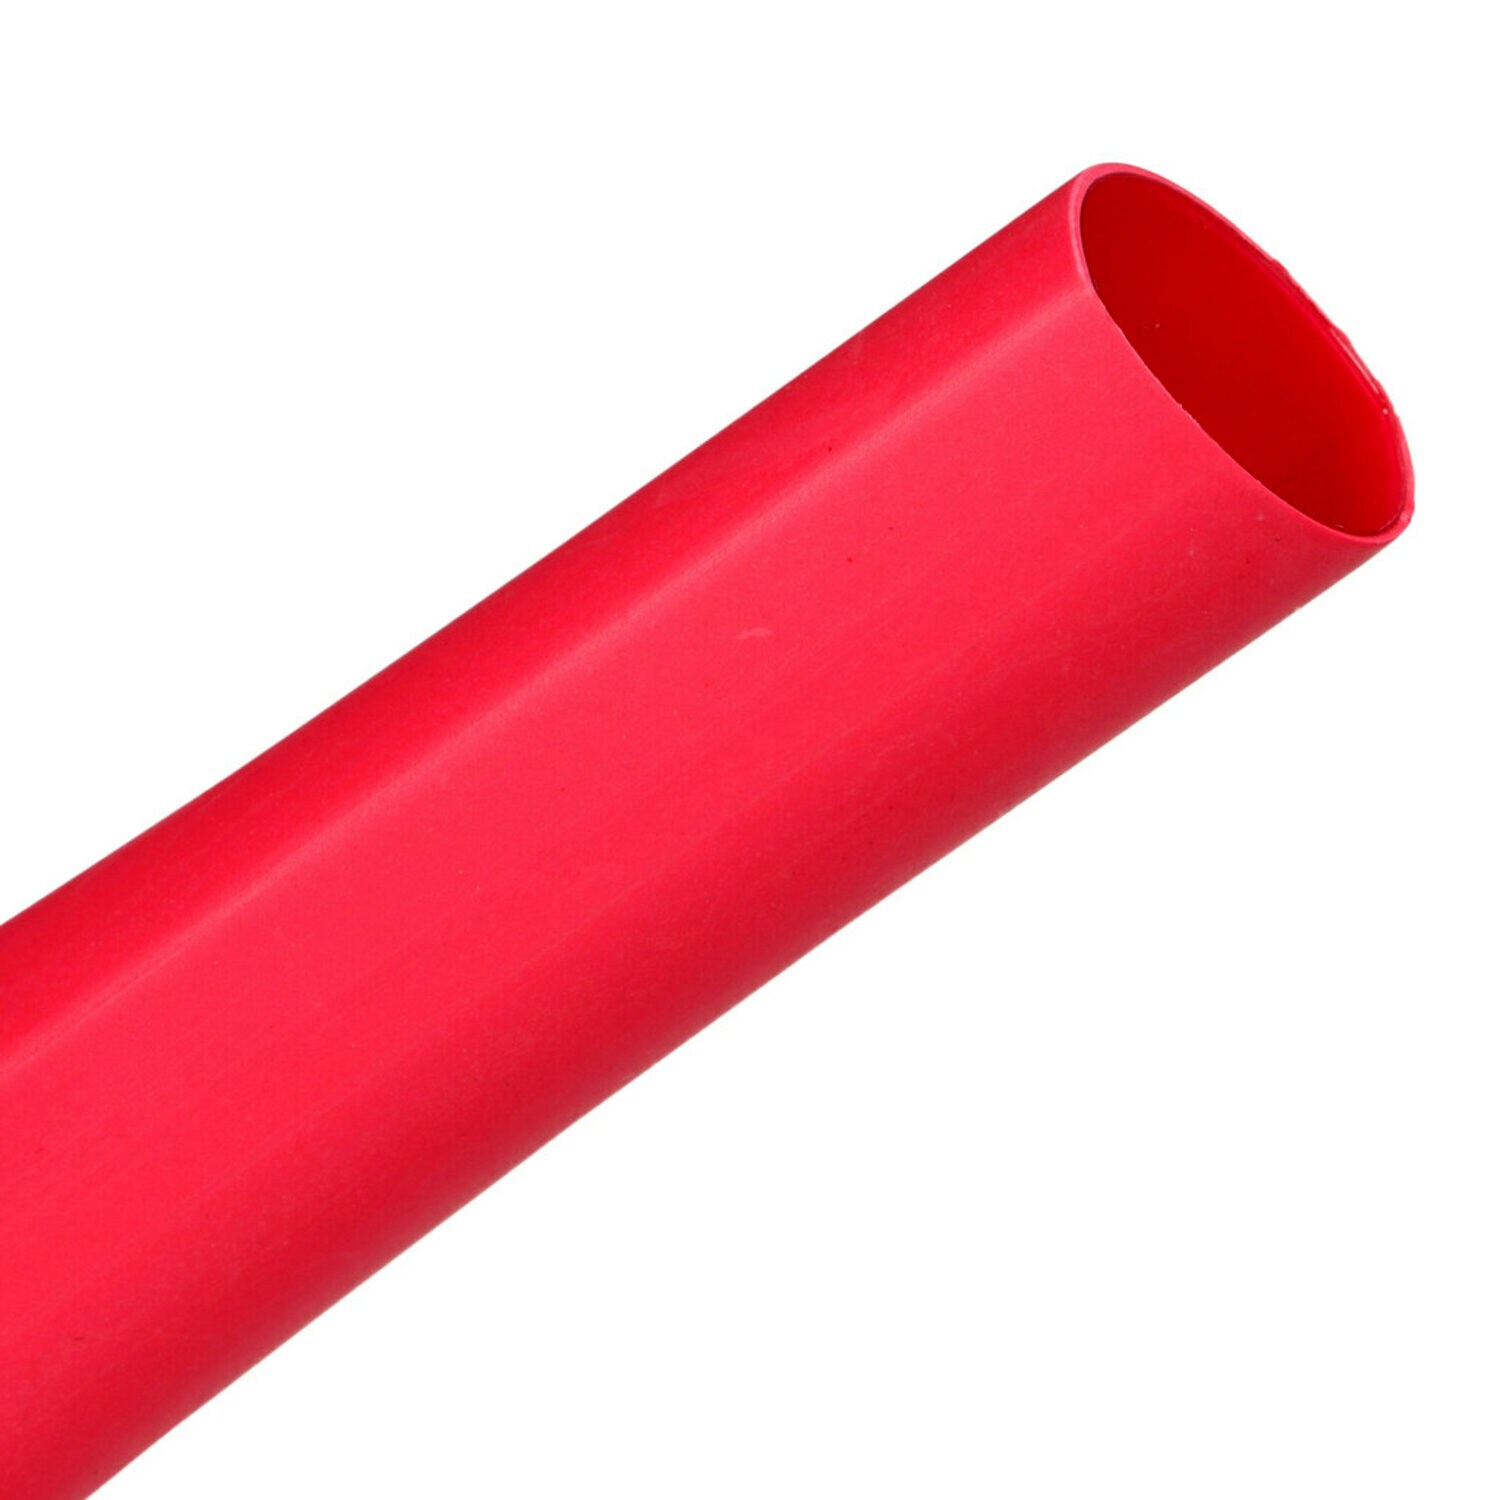 7100069408 - 3M Thin-Wall Heat Shrink Tubing EPS-300, Adhesive-Lined, 3/4-48"-Red-45
Pcs, 48 in length sticks, 45 pieces/case